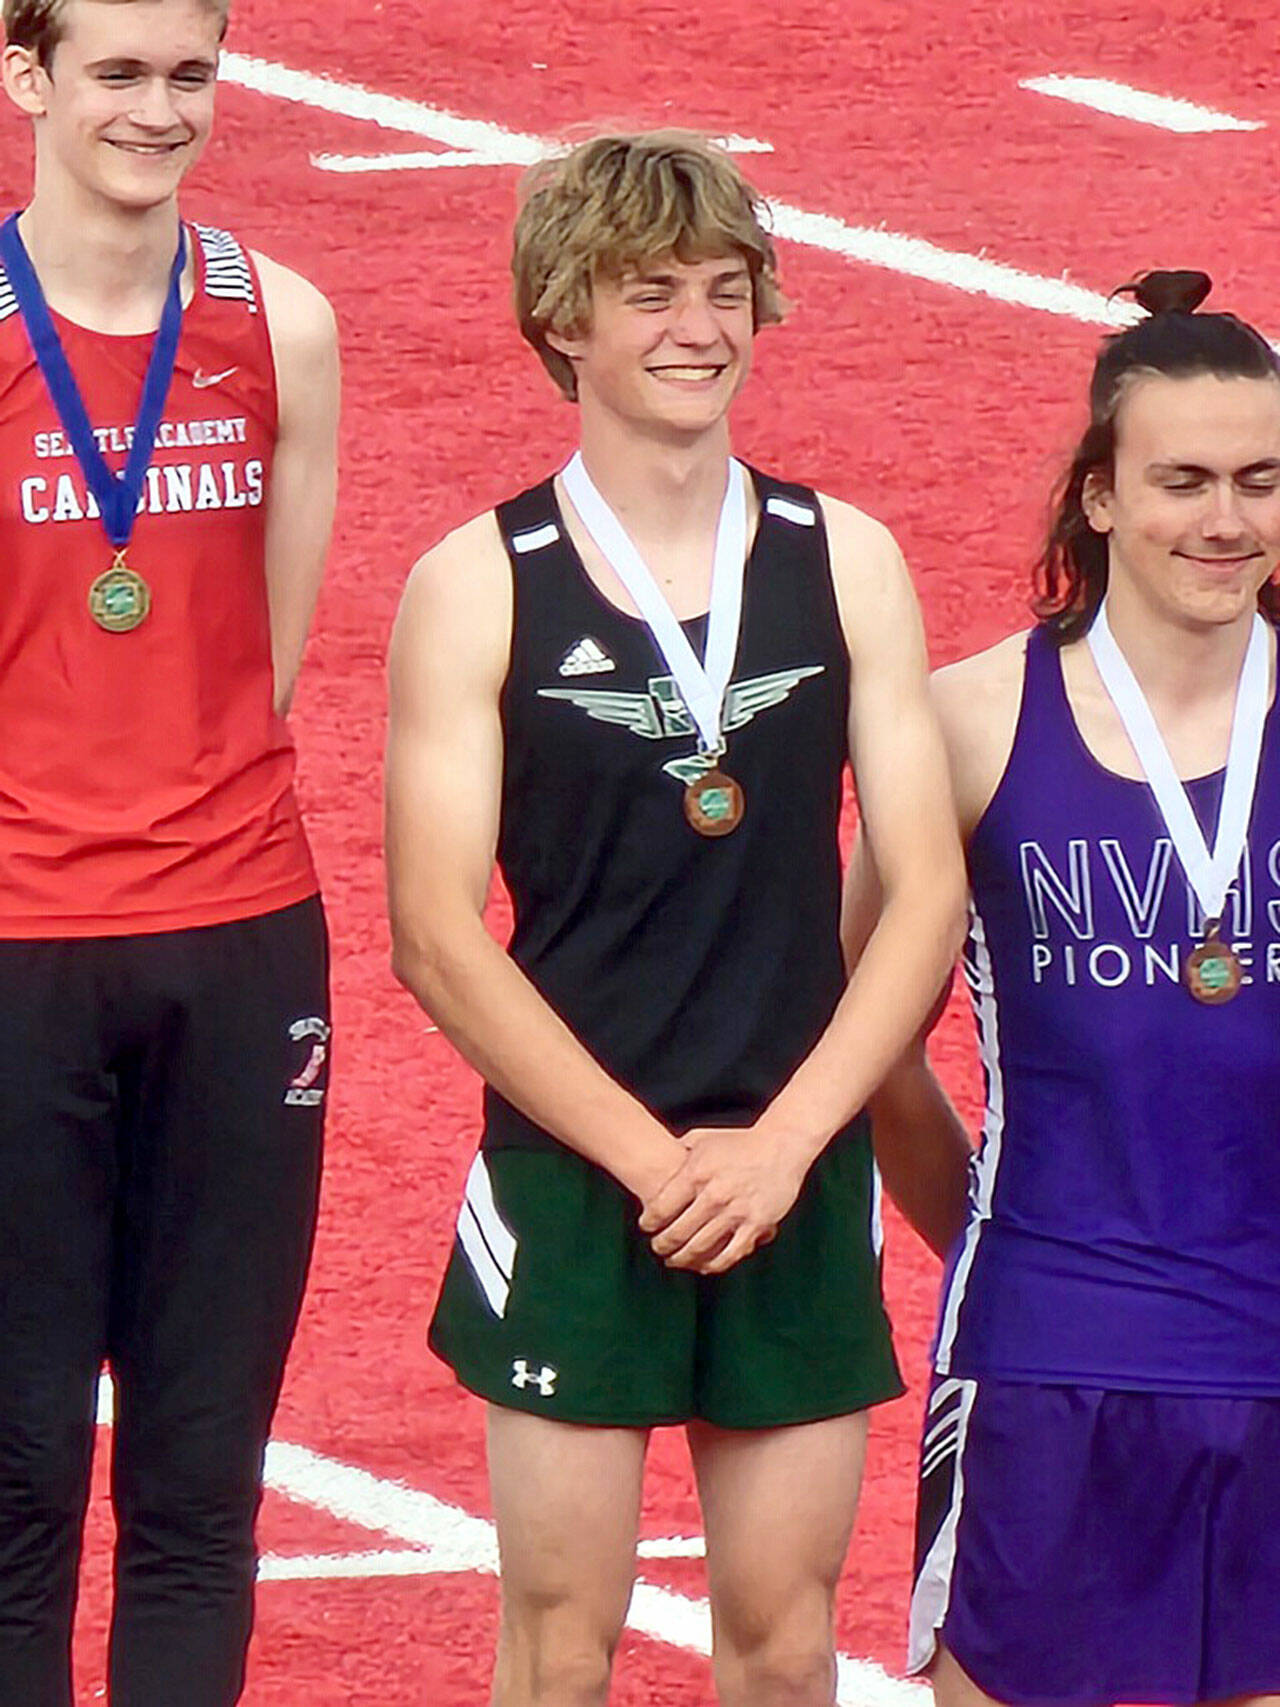 (Blake Gibbons Photo) Senior track athlete George Murphy stands on the awards podium with the third place medal that he received in the boys’ pole vault.